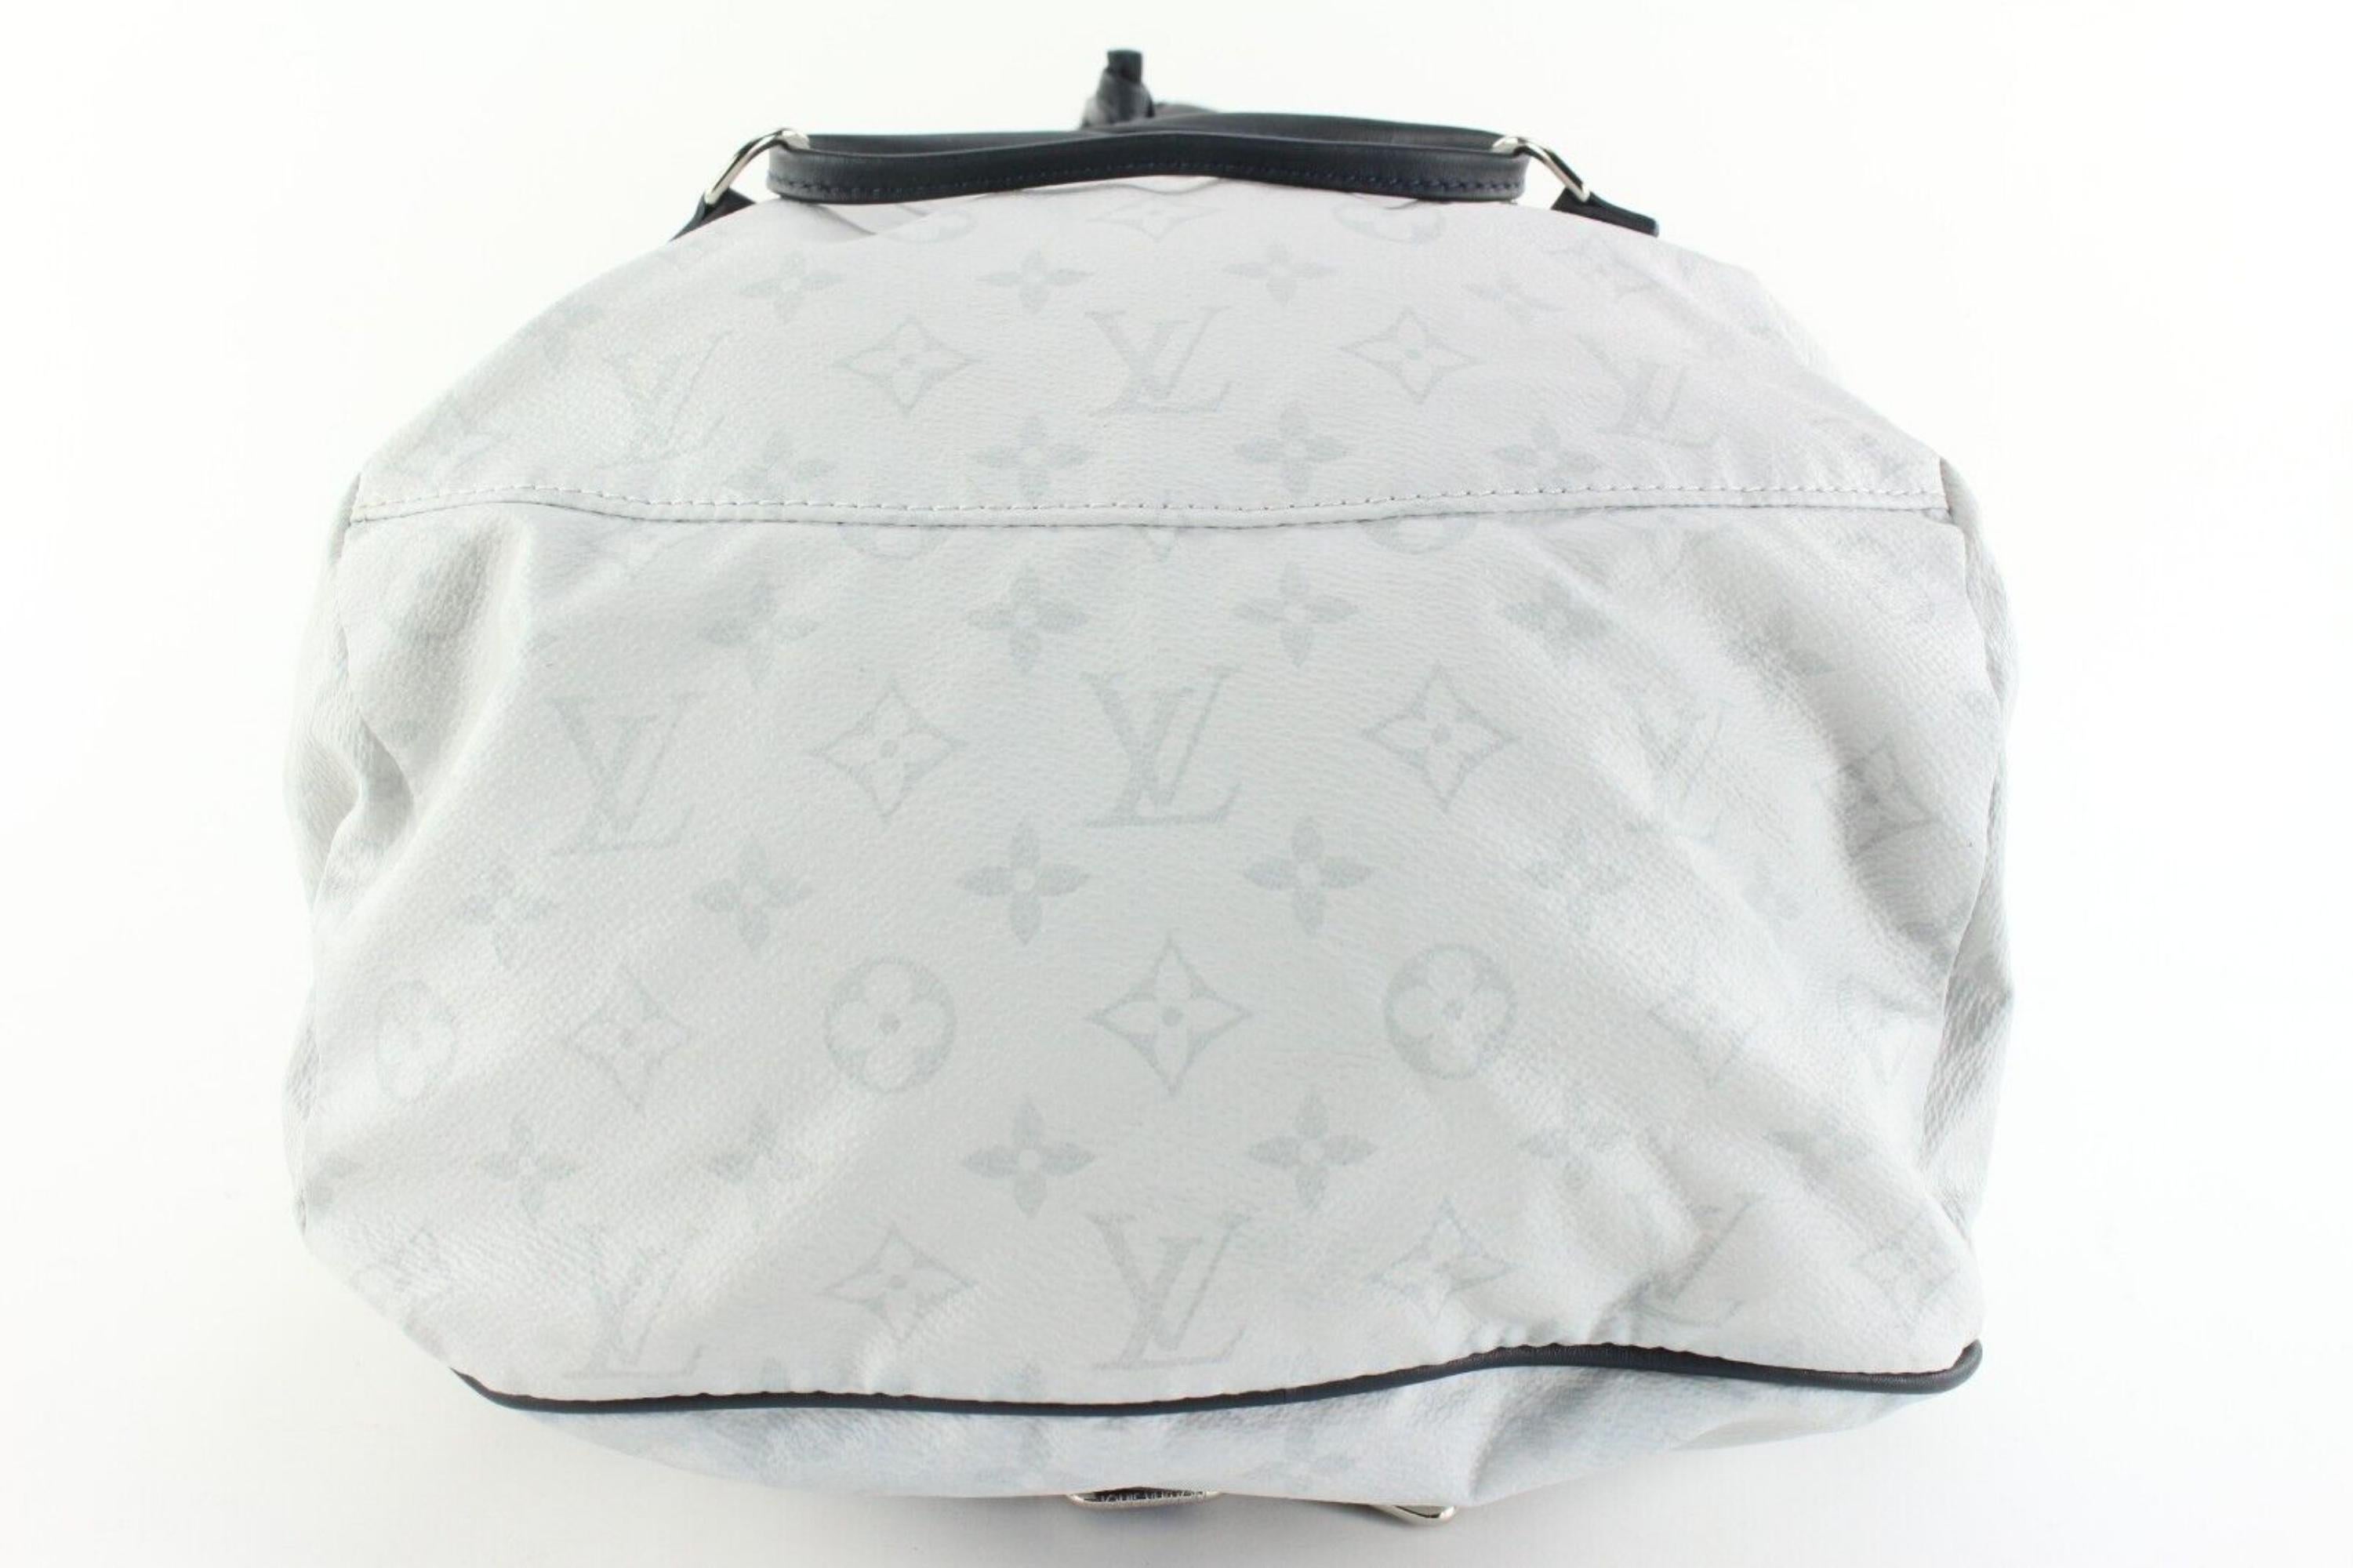 Louis Vuitton Rare White Antarctica Monogram Ultralight Backpack 6LVJ1118 In Good Condition For Sale In Dix hills, NY